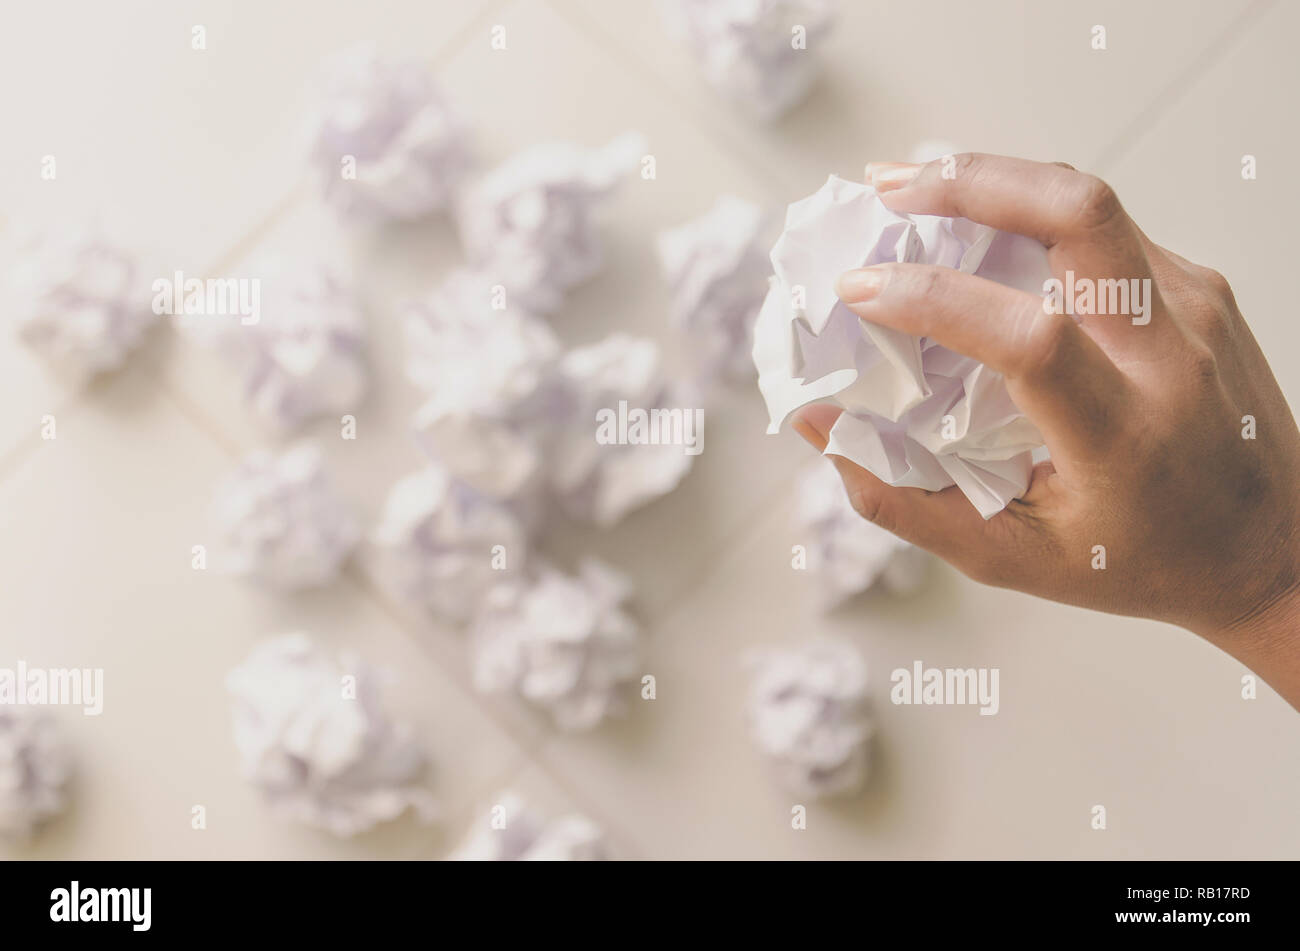 No idea and fail concept - Human hand holding crumpled paper or trash and white paper ball and waste on the floor, A hand are crumpling a paper, Recyc Stock Photo